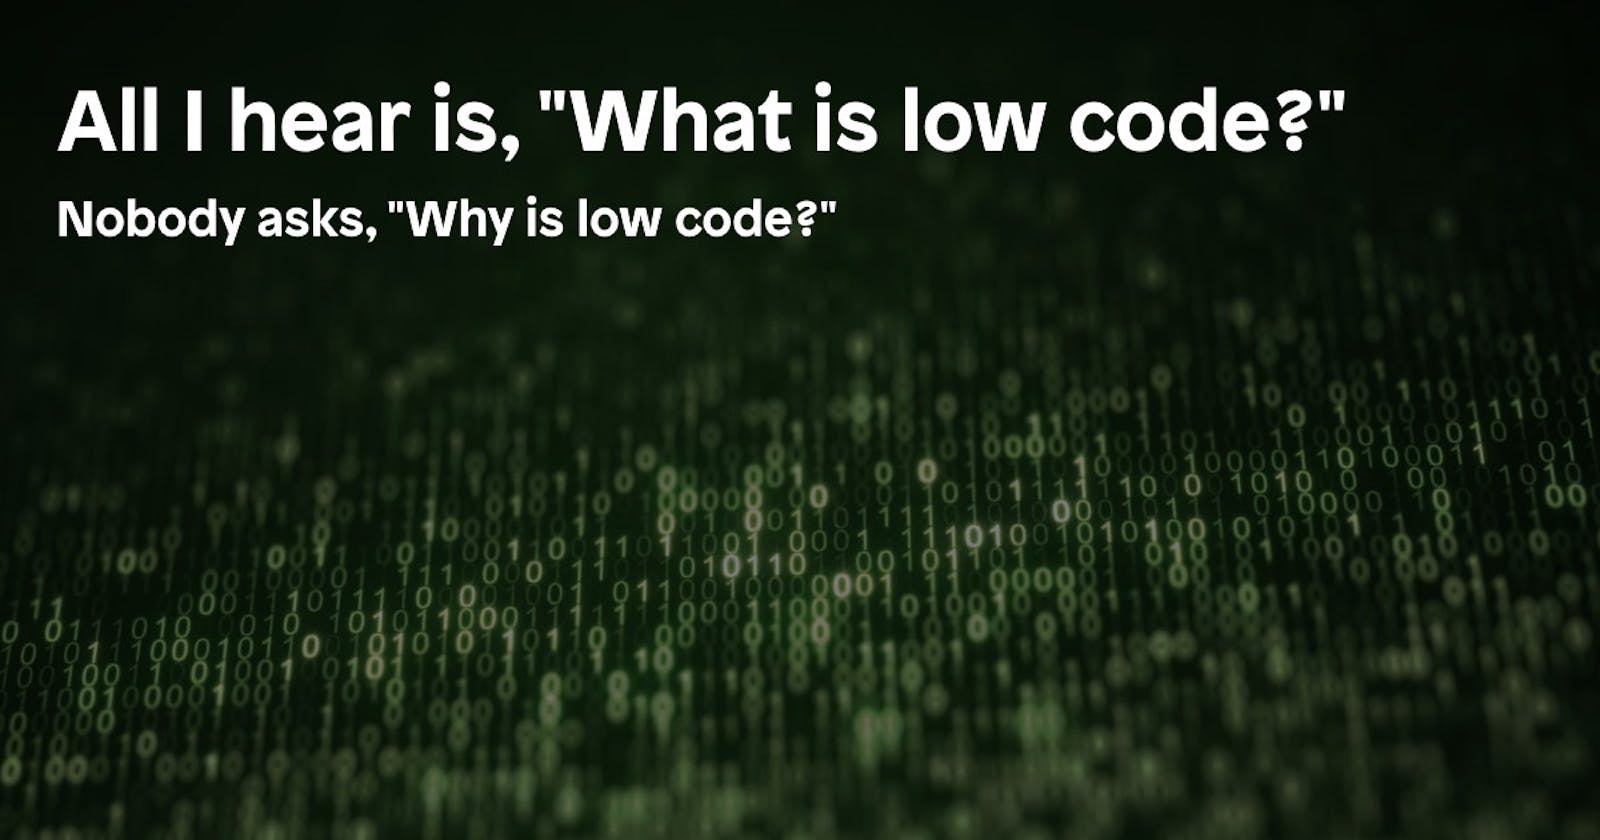 All I hear is "What is low code?"